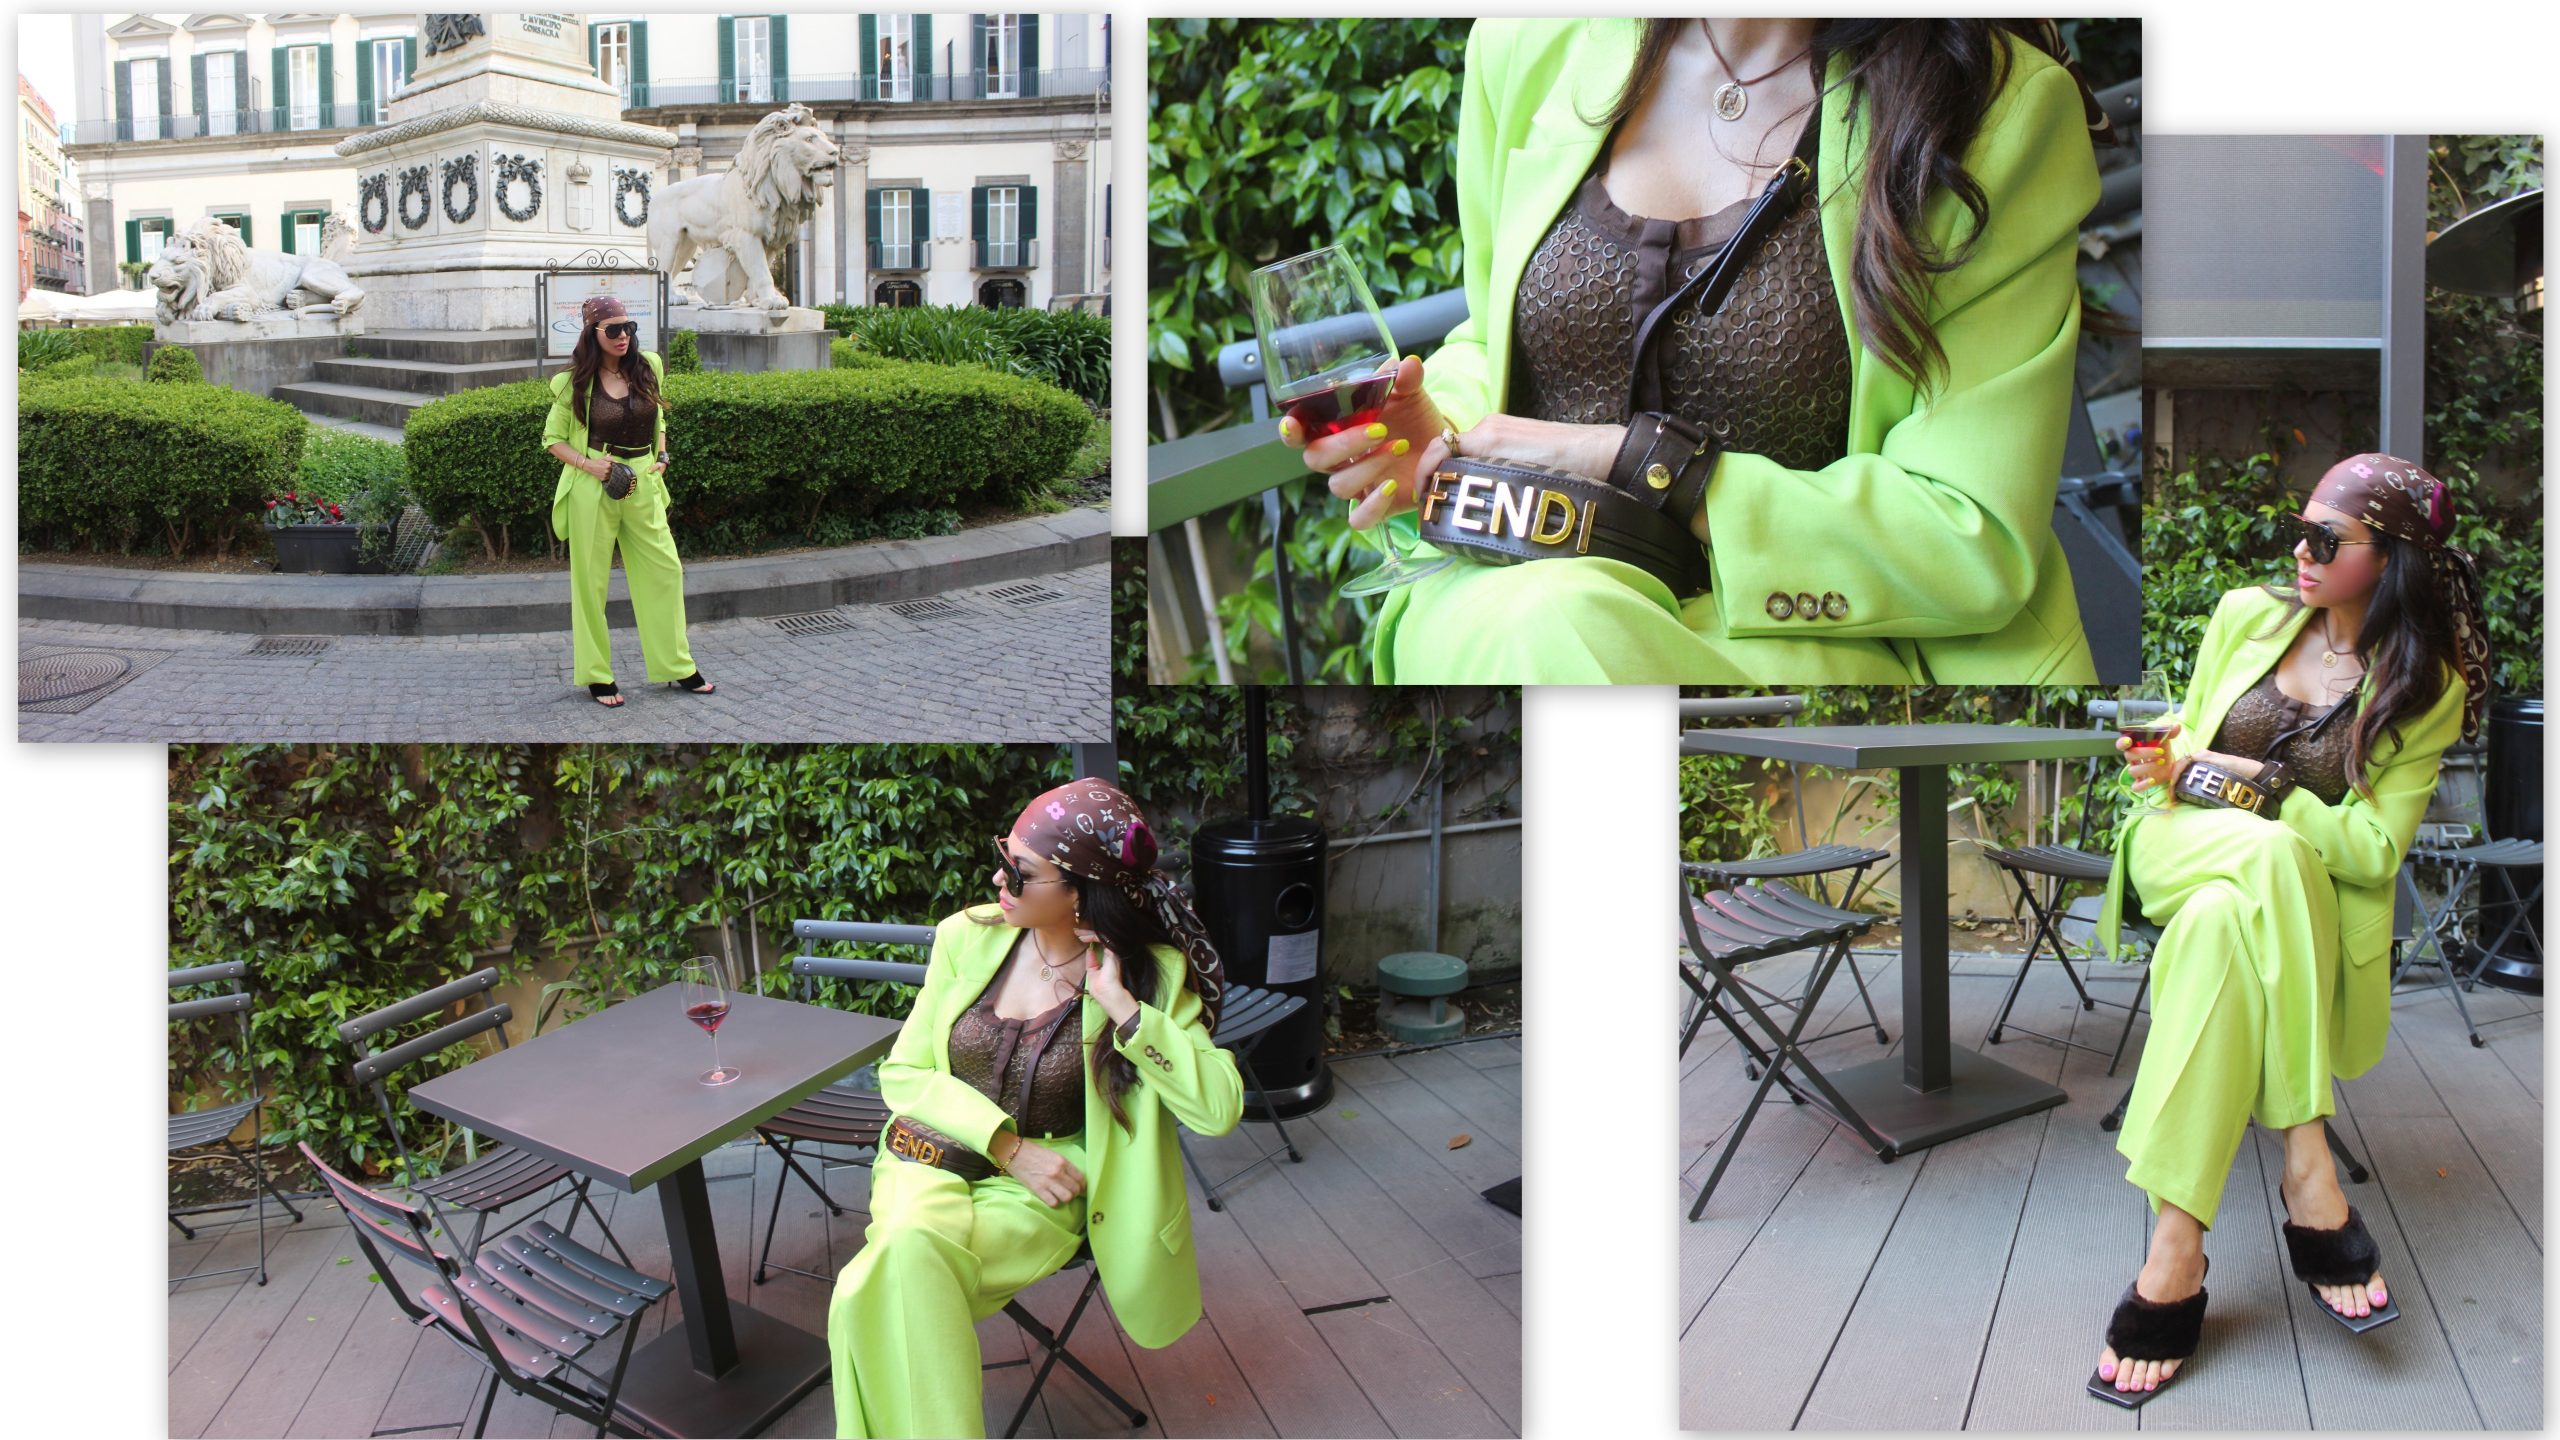 Naples Italy VICOLO tailleur LOUIS VUITTON foulard FENDI accessories green and brown look Paola Lauretano 